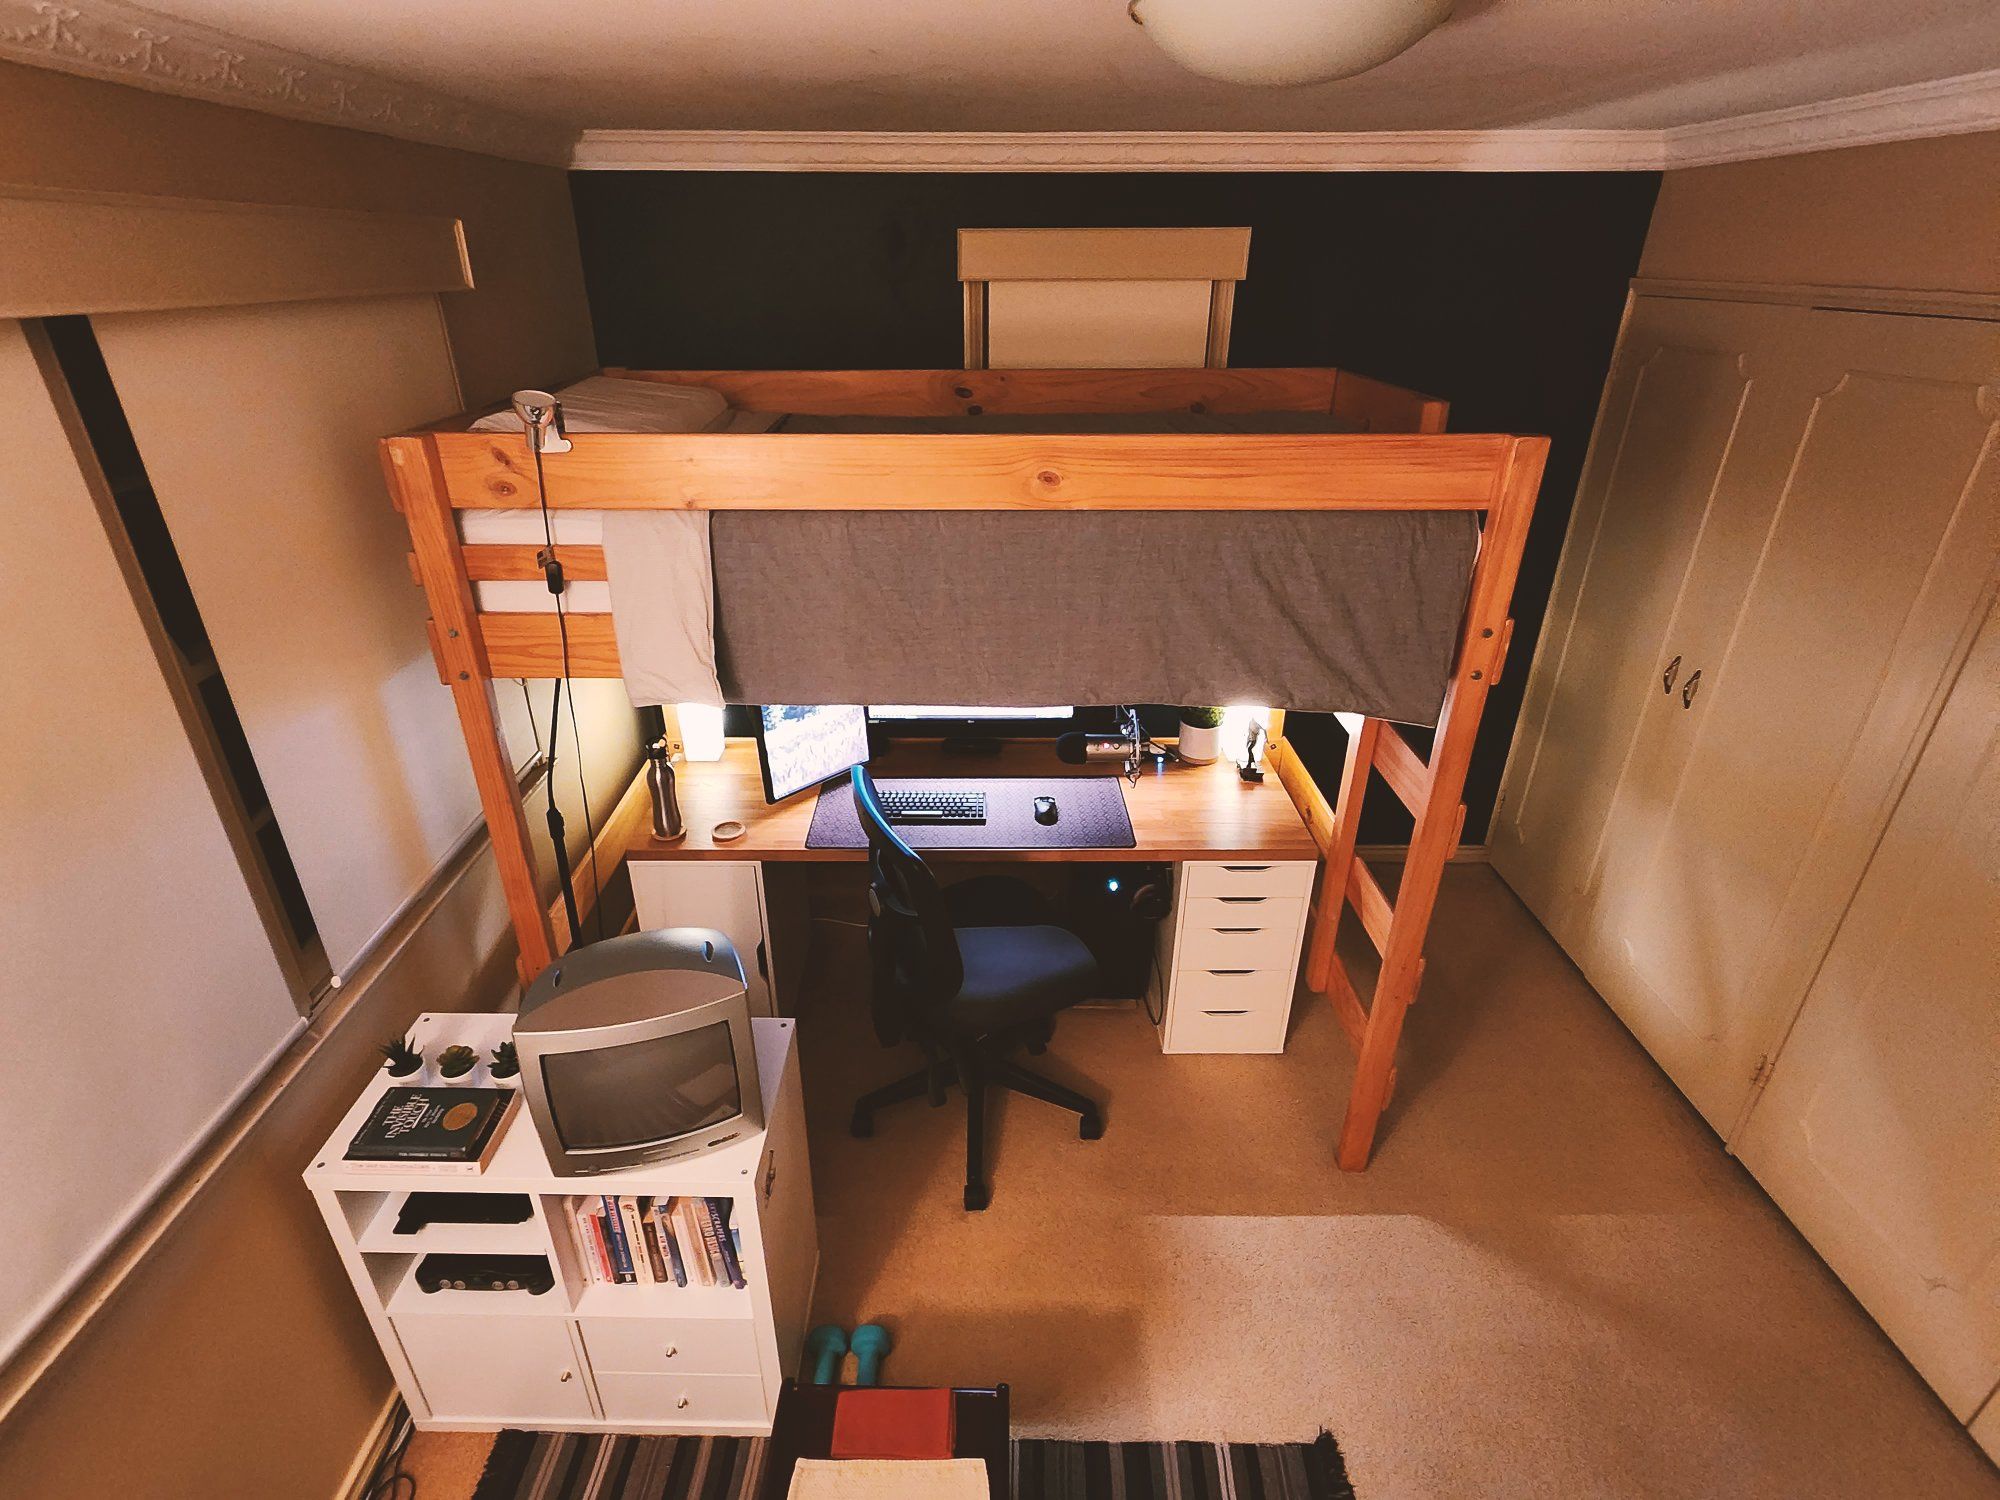 A view of the bedroom home office from the top